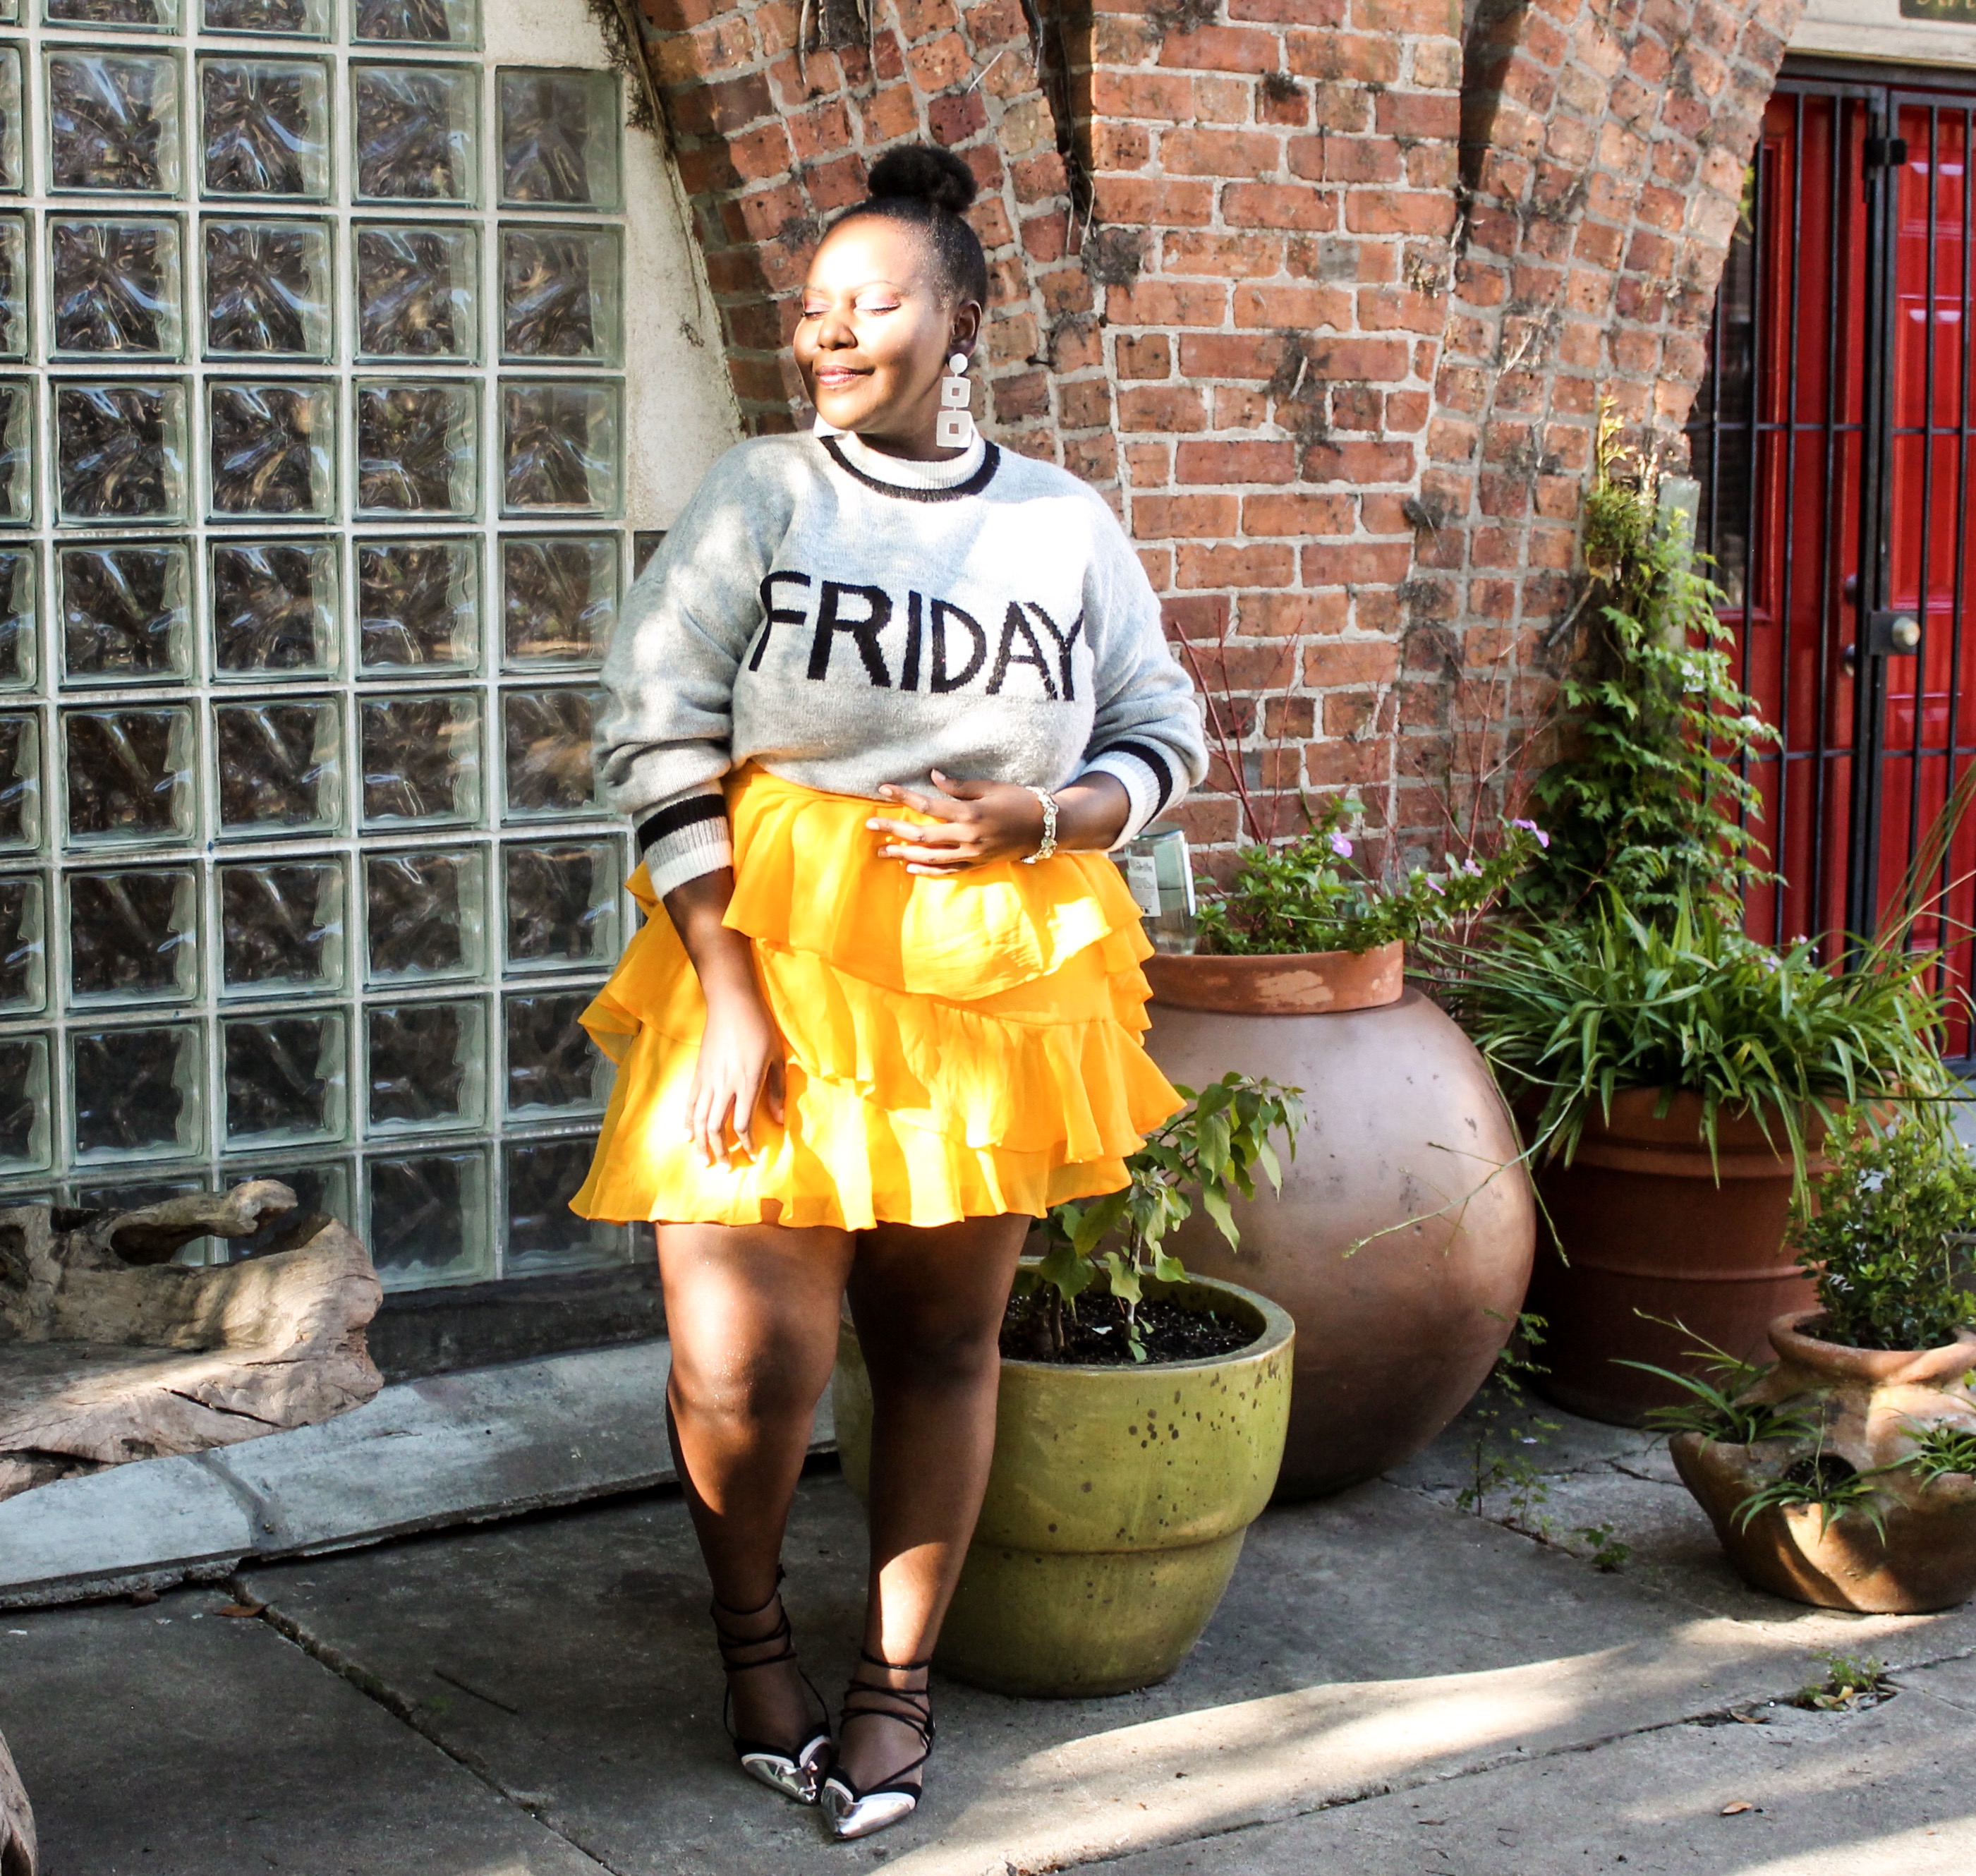 african travel blogger, preppy plus size fashion blogs 2017, beautiful curvy girls, how to fill the eye brow of a dark skin, beautiful plus size dark skin girls, plus size black bloggers, clothes for curvy girls, curvy girl fashion clothing, plus blog, plus size fashion tips, plus size women blog, curvy women fashion, plus blog, curvy girl fashion blog, style plus curves, plus size fashion instagram, curvy girl blog, bbw blog, plus size street fashion, plus size beauty blog, plus size fashion ideas, curvy girl summer outfits, plus size fashion magazine, plus fashion bloggers, zara, Rosie the riveter shirt; Emilia embroidered beaded clutch; Vince Camuto heels; Lula shell drop earrings; Aldo Galigossi sunnies, tenge collection, codexmode, zara, asos